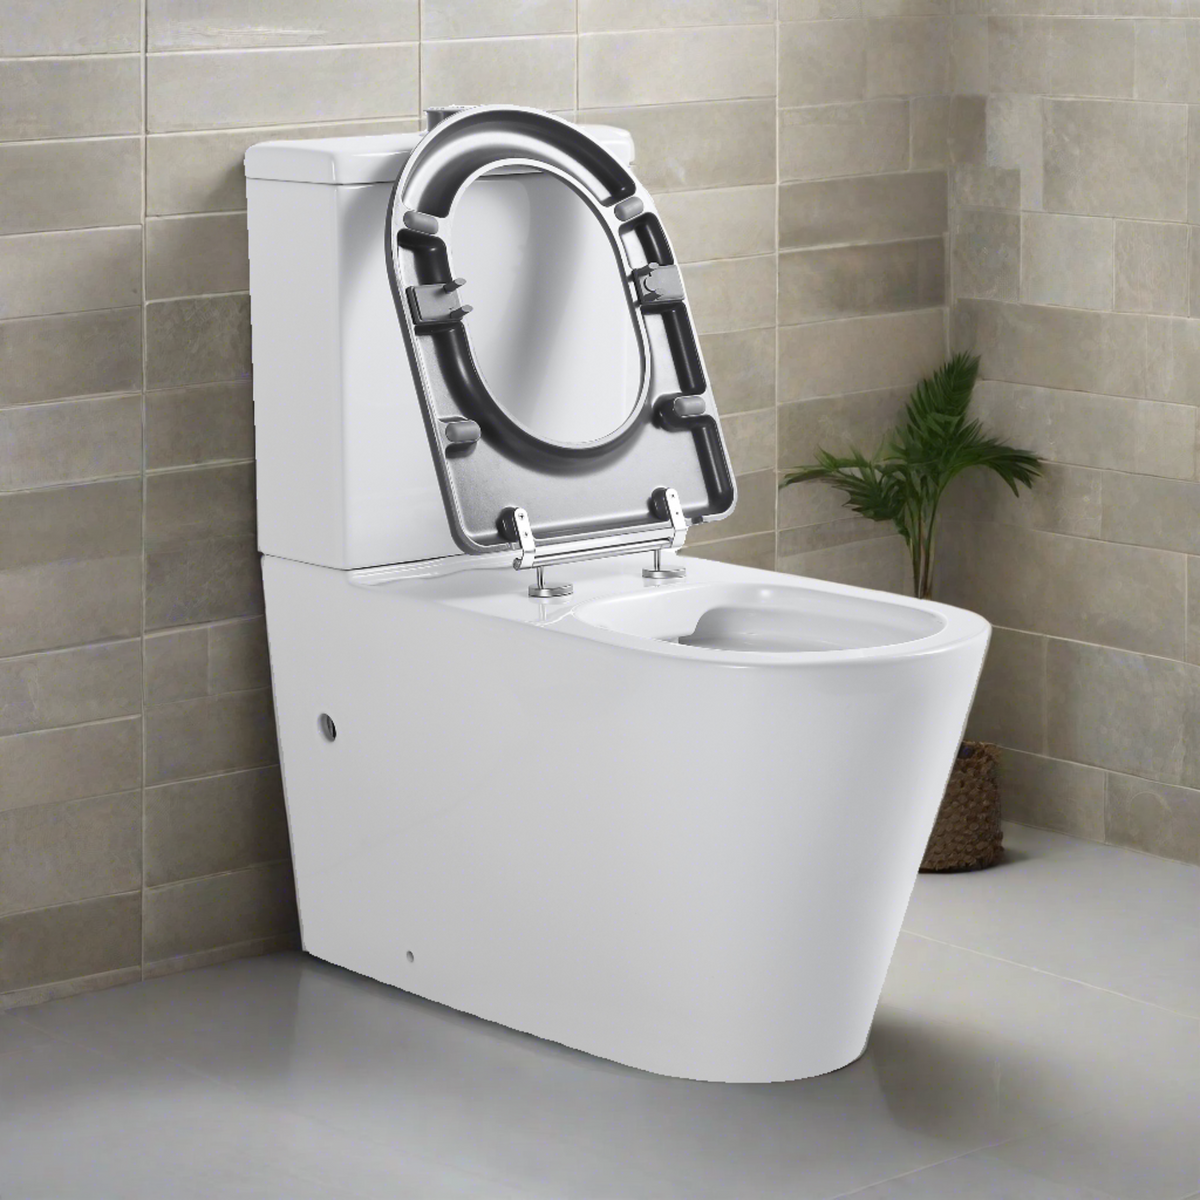 Ultra Access Back-to-Wall Rimless Flushing Accessible Toilet in Gloss White